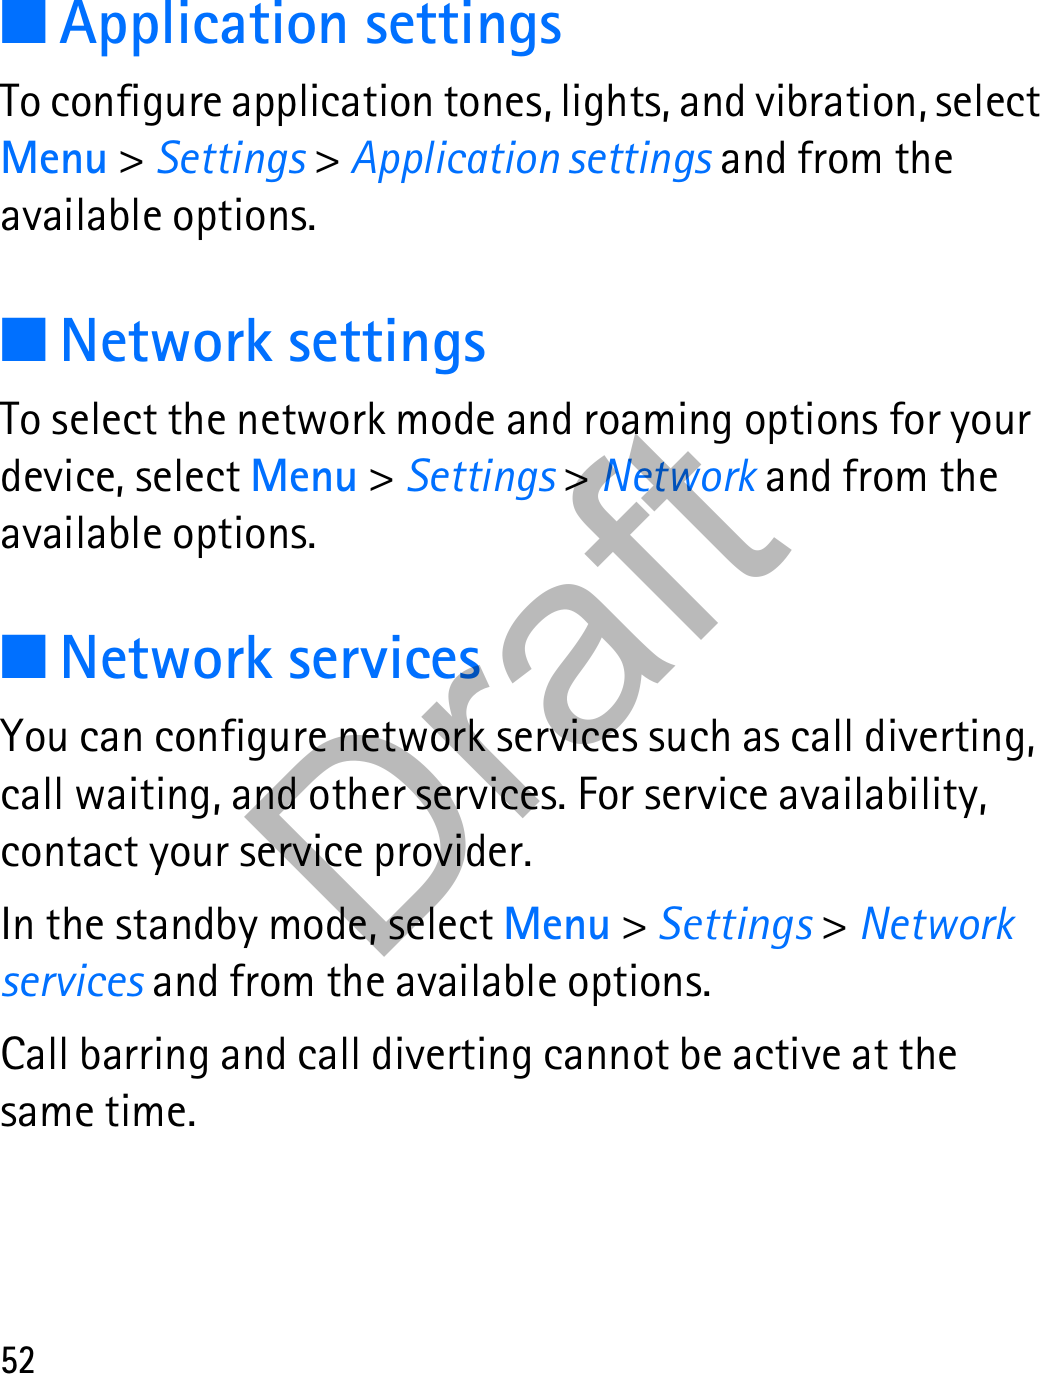 52■Application settingsTo configure application tones, lights, and vibration, select Menu &gt; Settings &gt; Application settings and from the available options.■Network settingsTo select the network mode and roaming options for your device, select Menu &gt; Settings &gt; Network and from the available options.■Network servicesYou can configure network services such as call diverting, call waiting, and other services. For service availability, contact your service provider.In the standby mode, select Menu &gt; Settings &gt; Network services and from the available options.Call barring and call diverting cannot be active at the same time.Draft